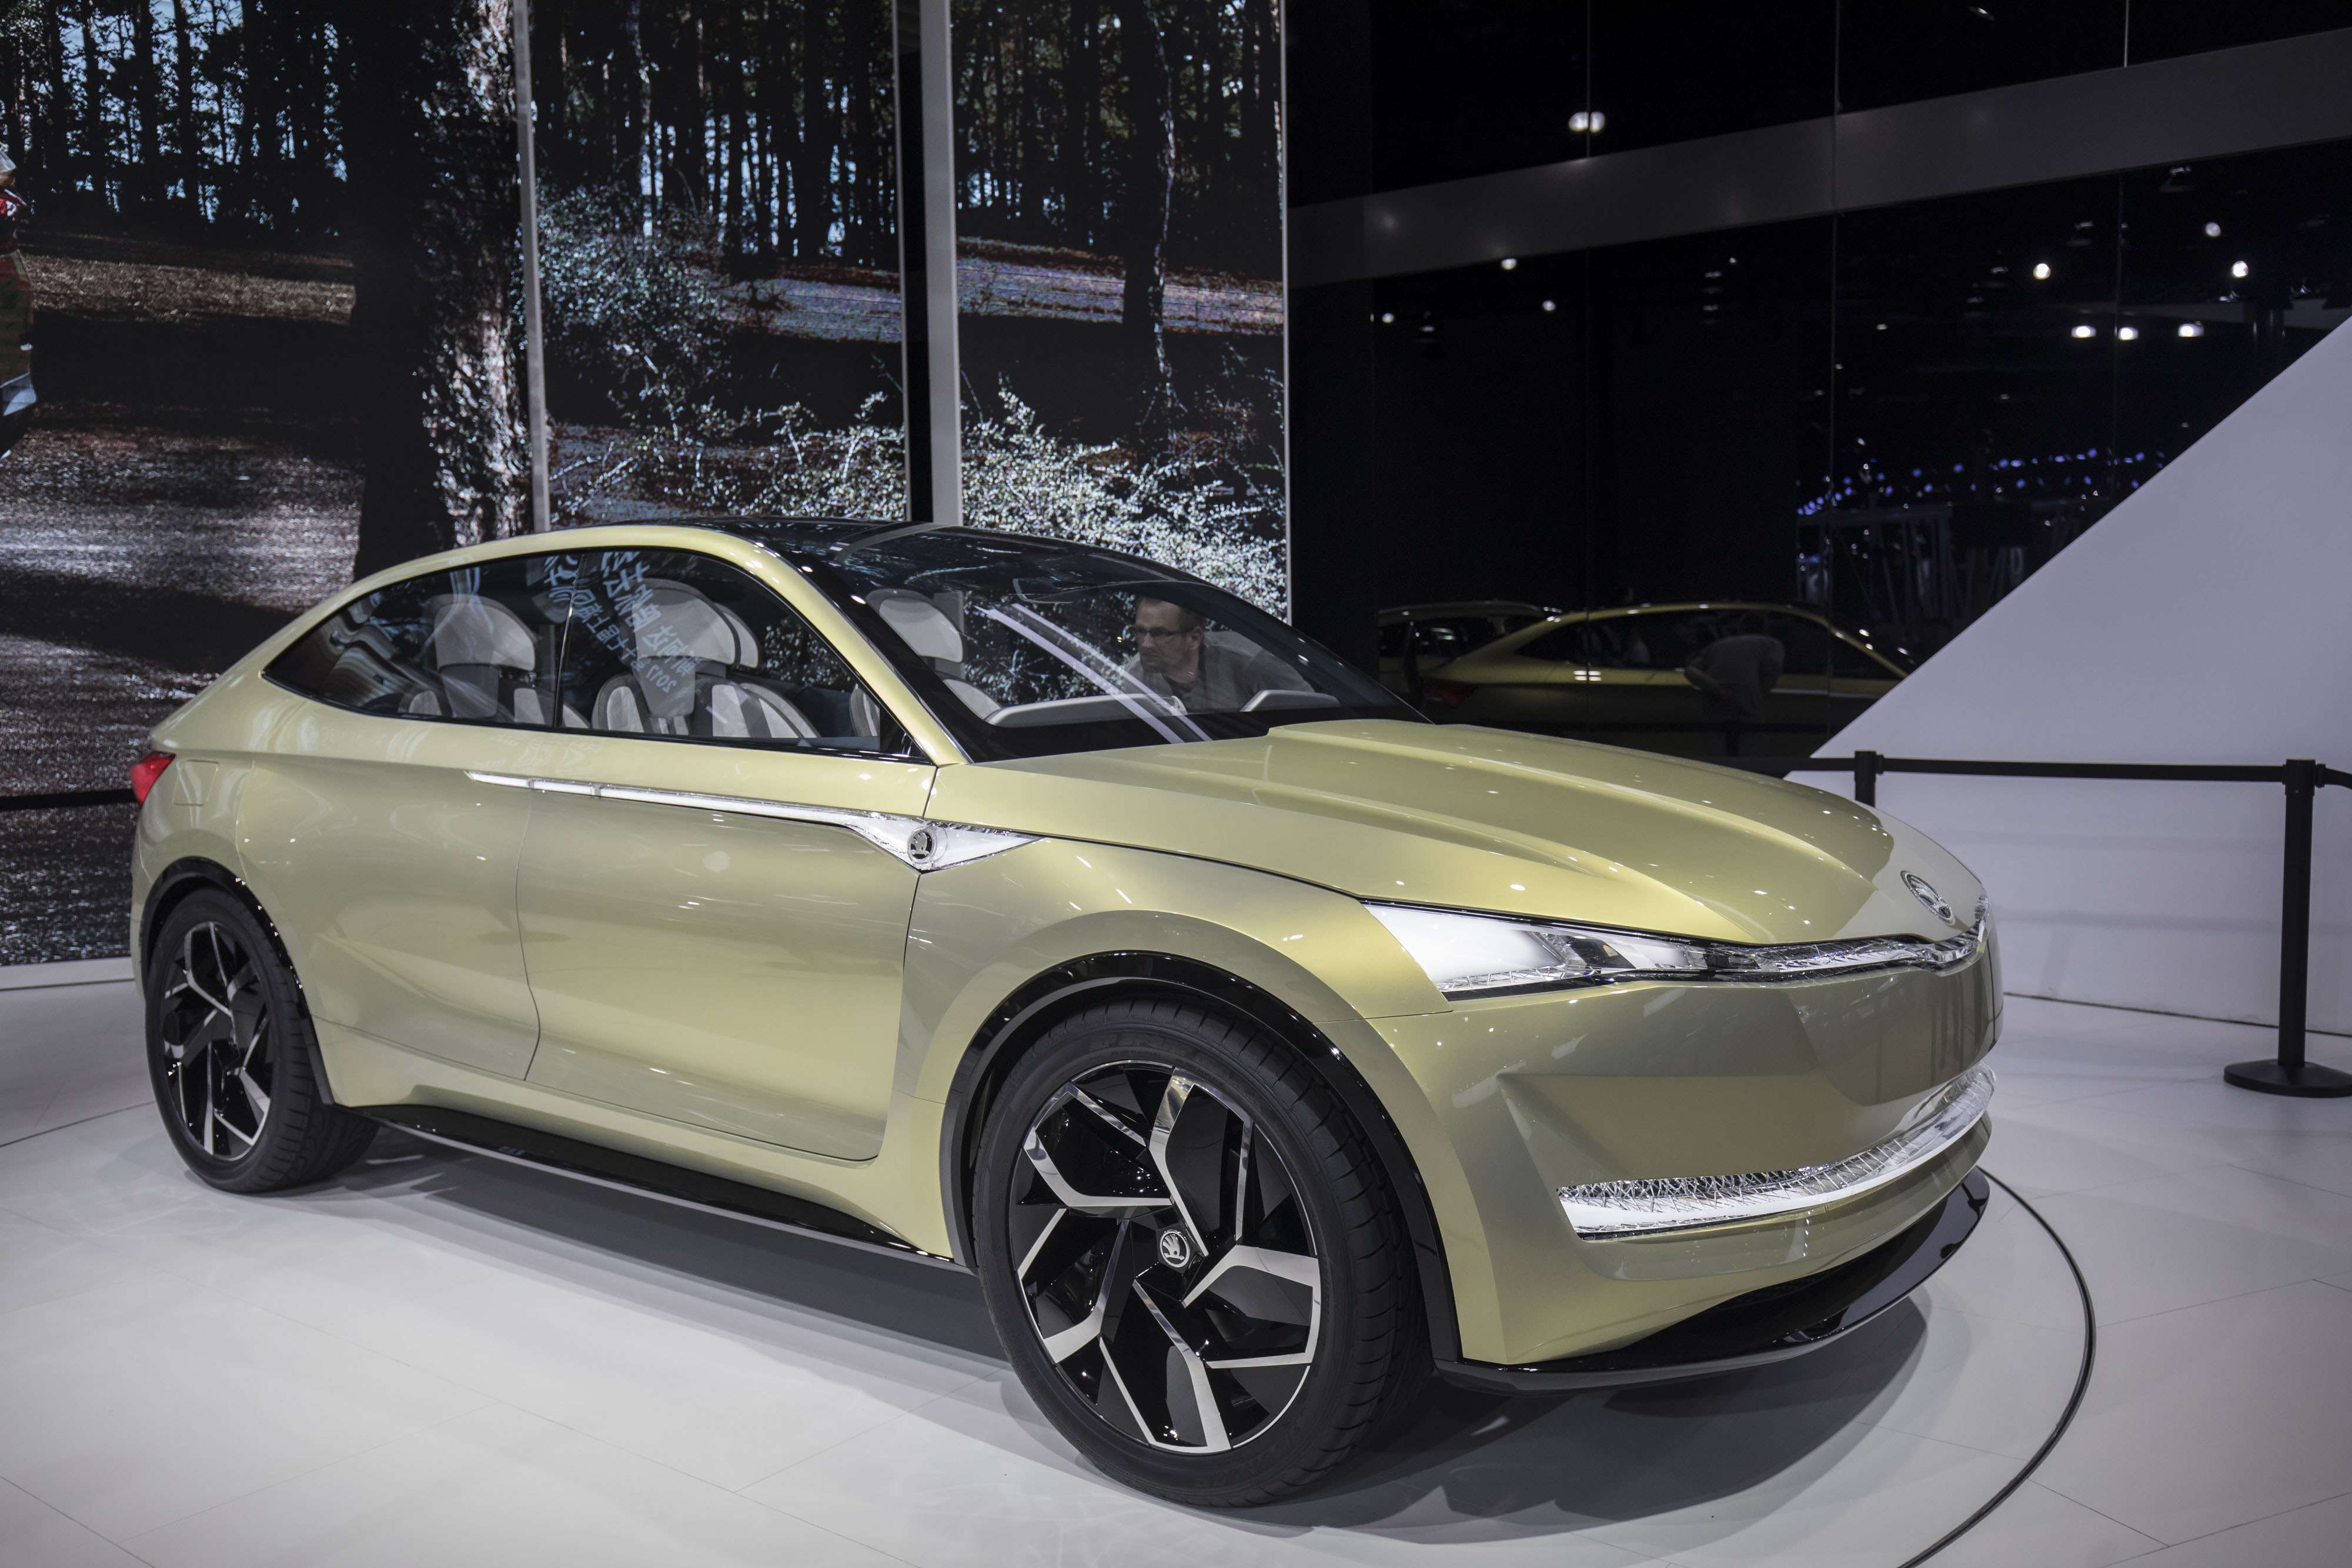 A Skoda AG Vision E concept electric SUV on display at Auto Shanghai 2017. Photo: Bloomberg